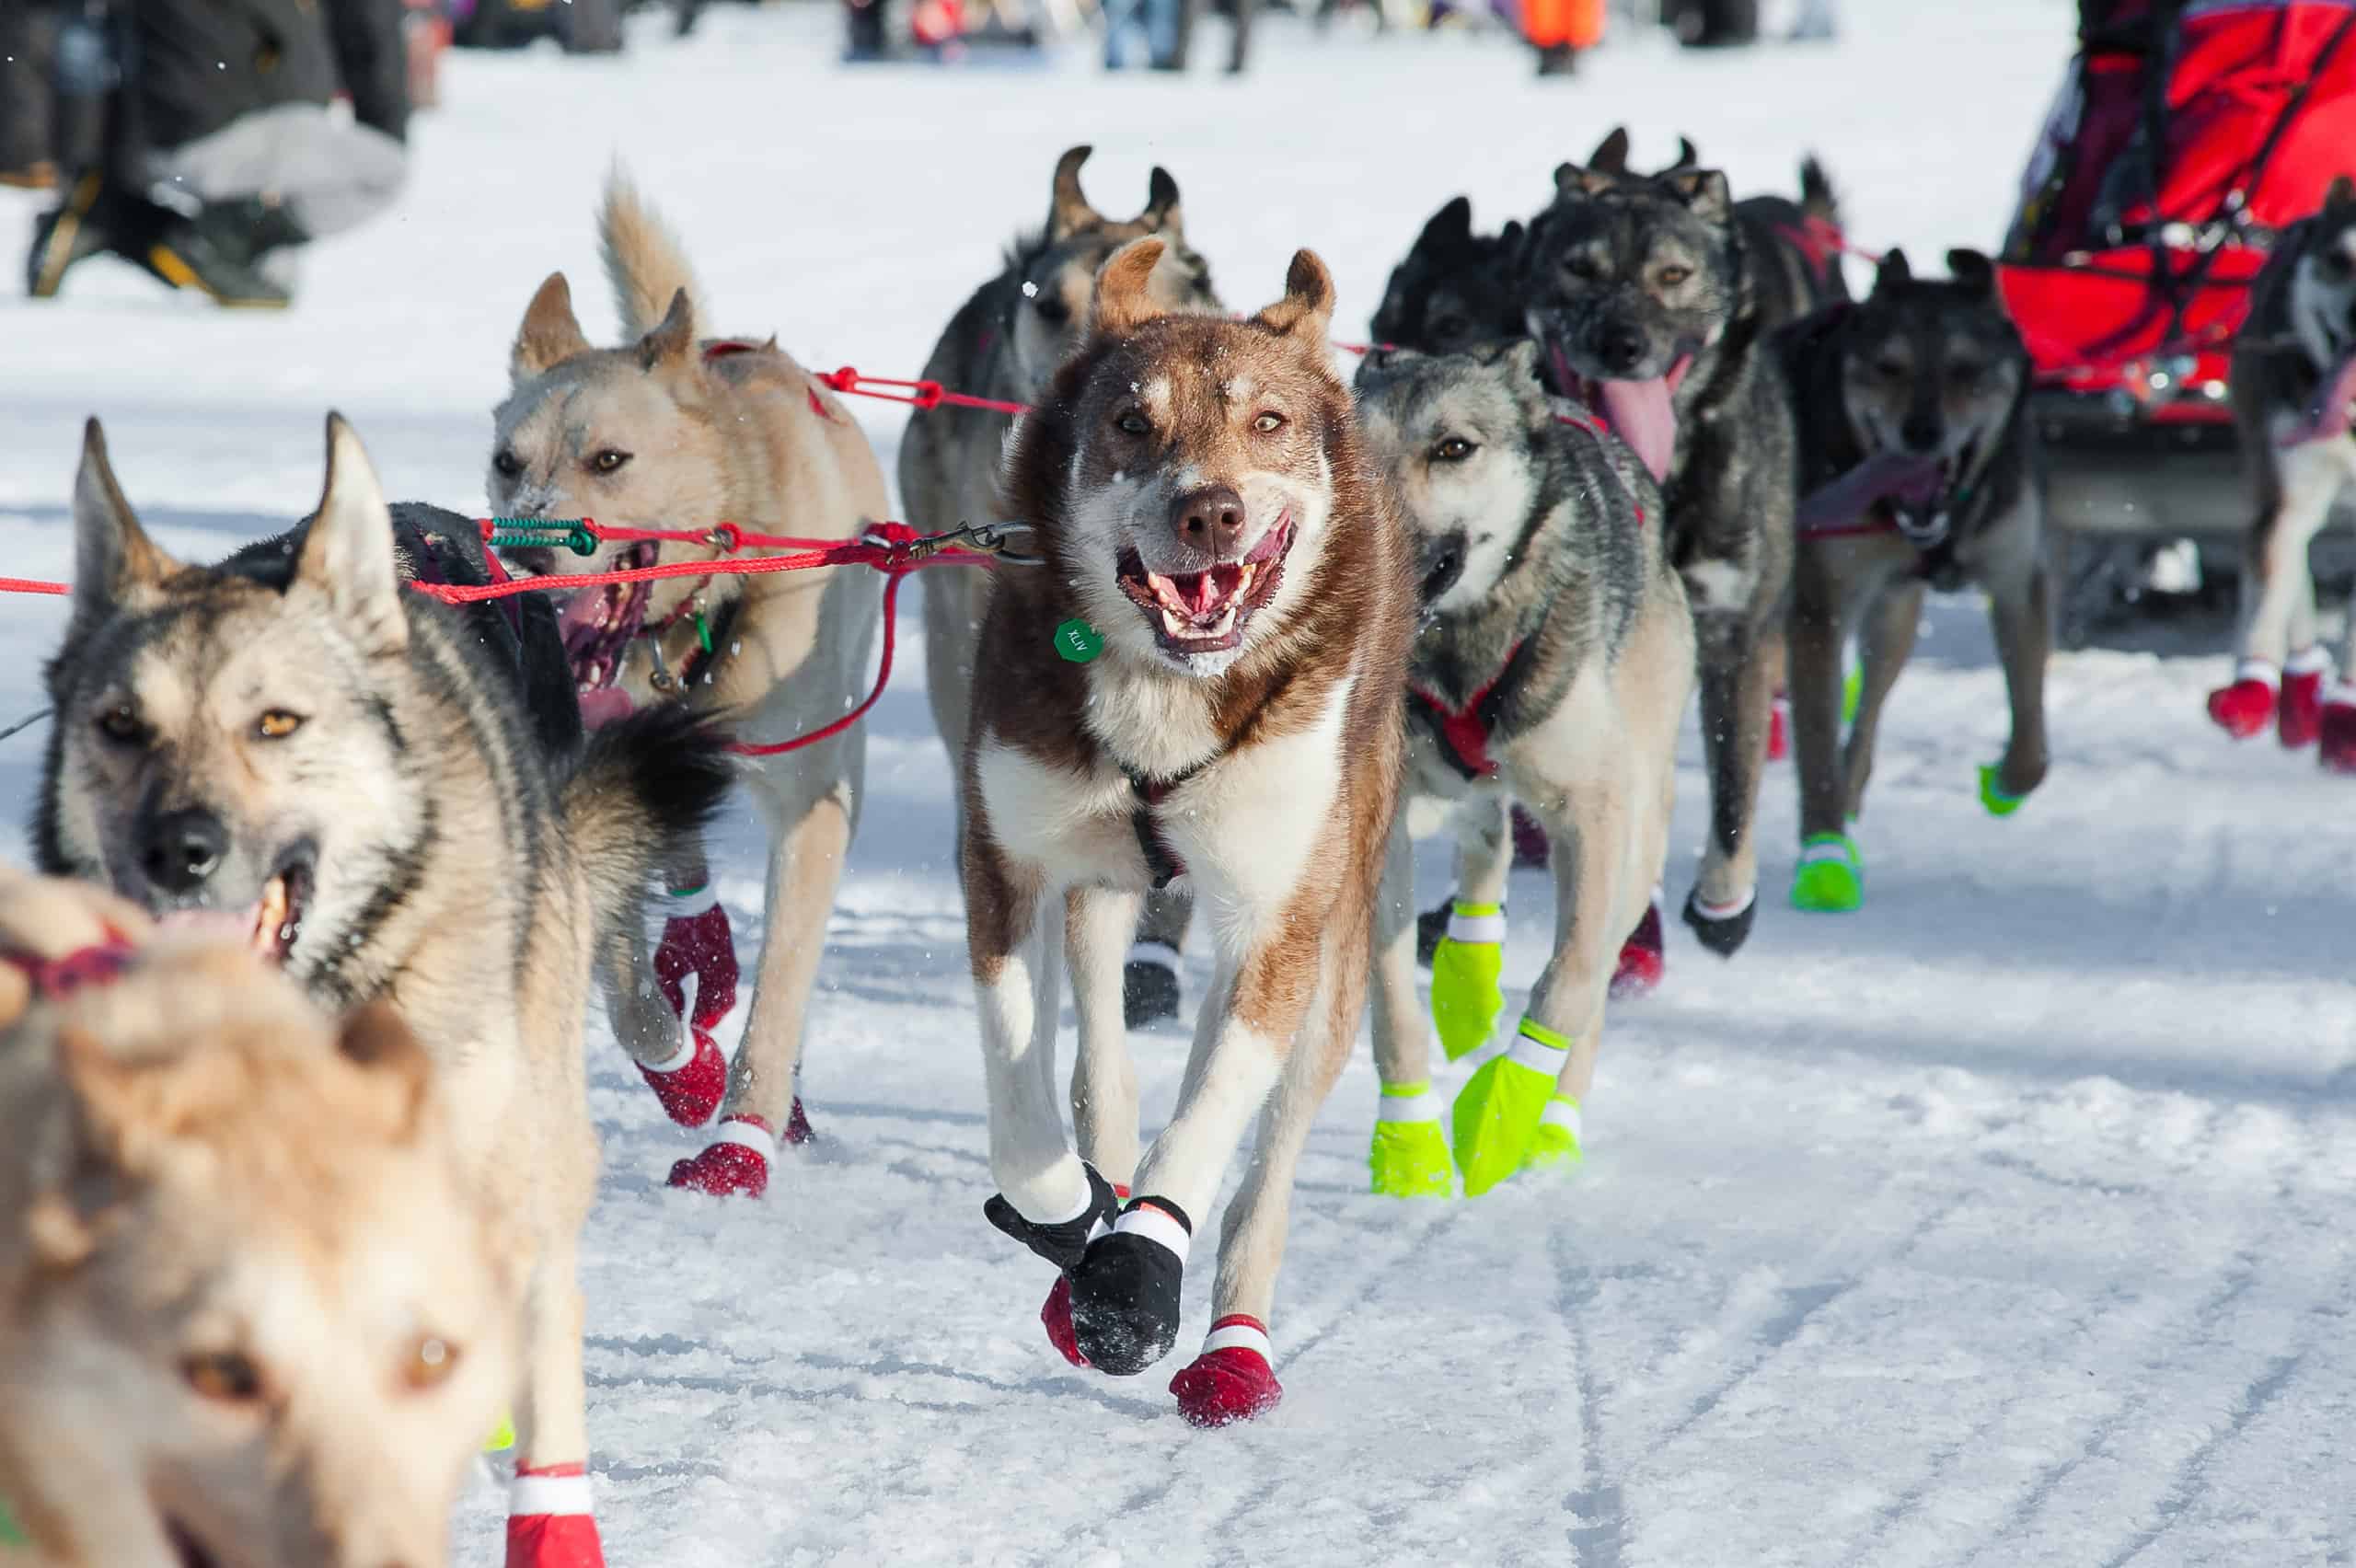 Sled dogs running in a race wearing paw protection